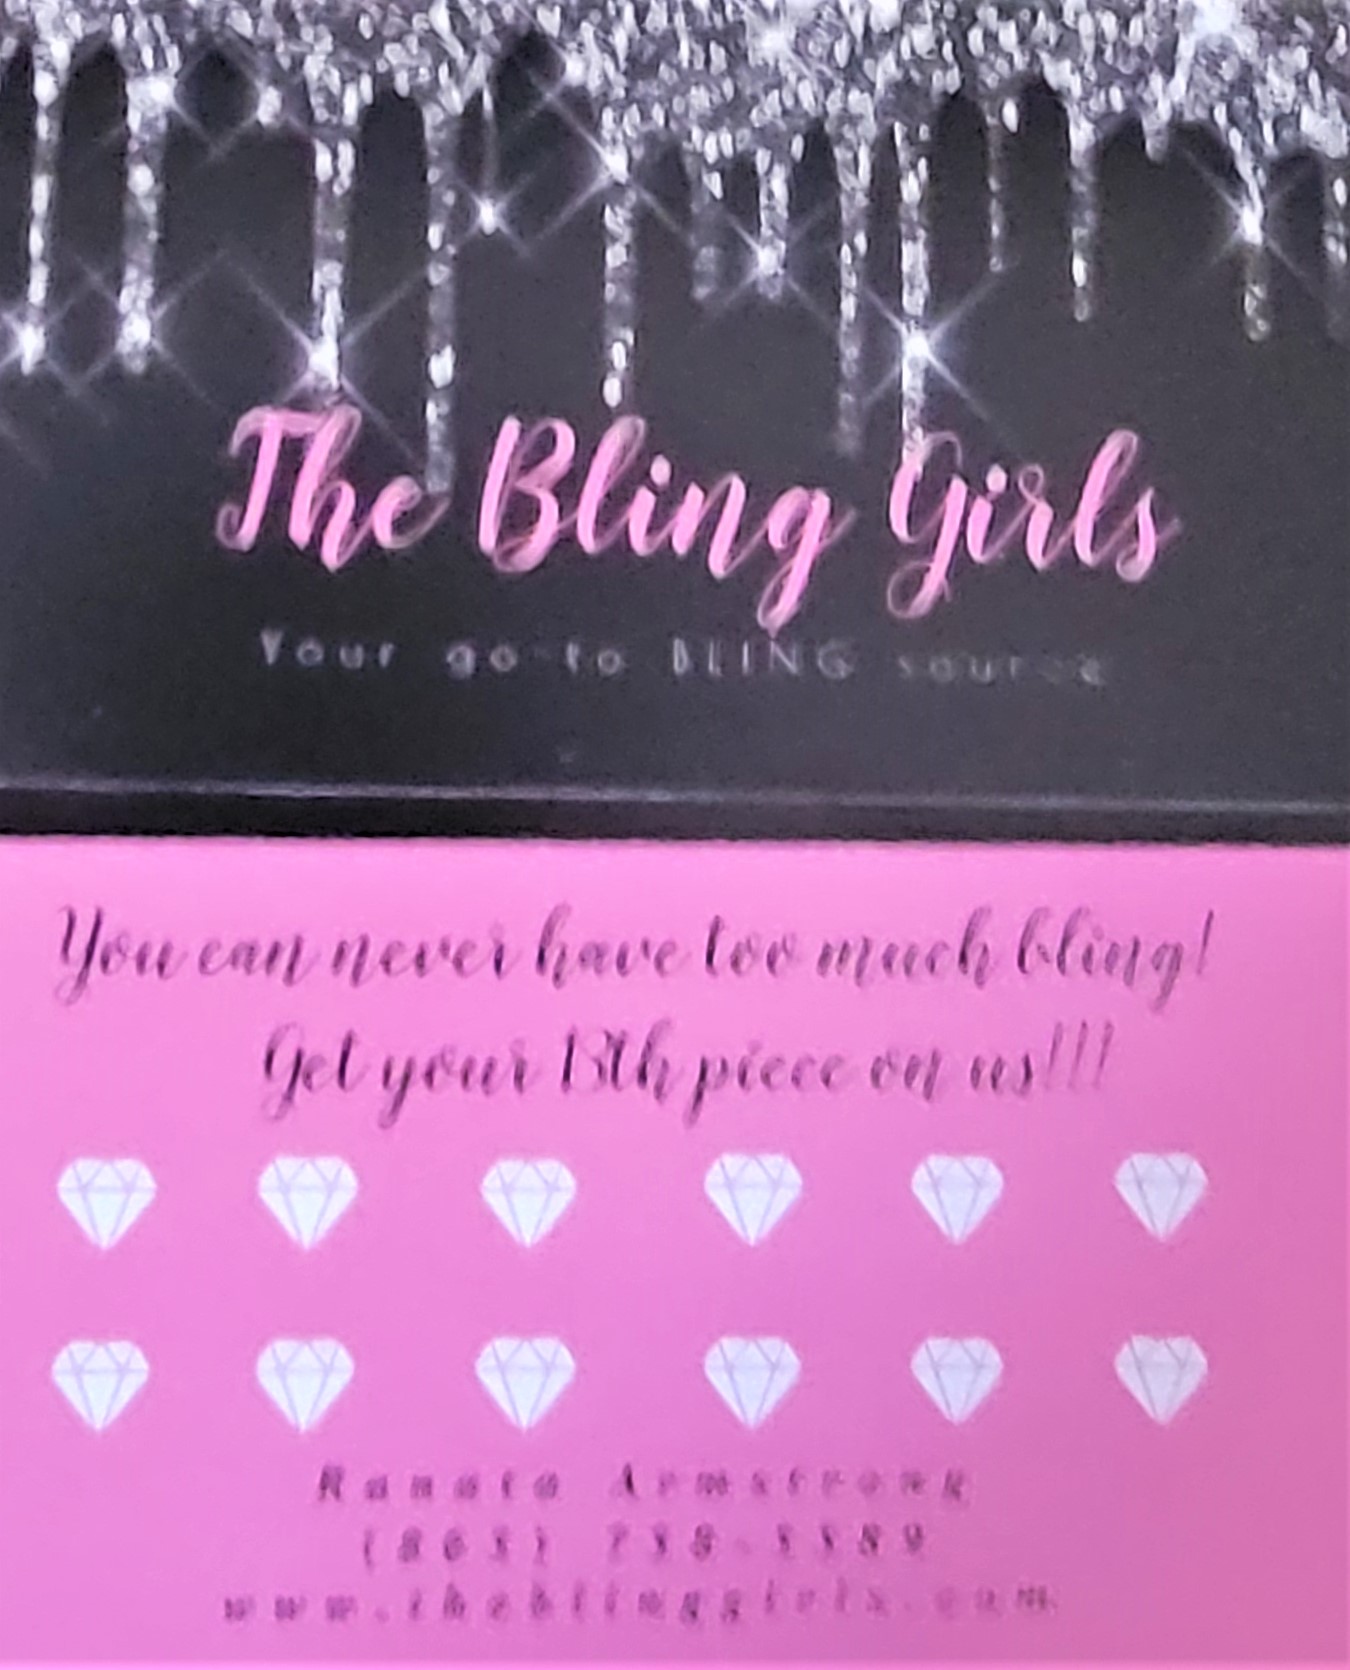 RCC welcomes The Bling Girls